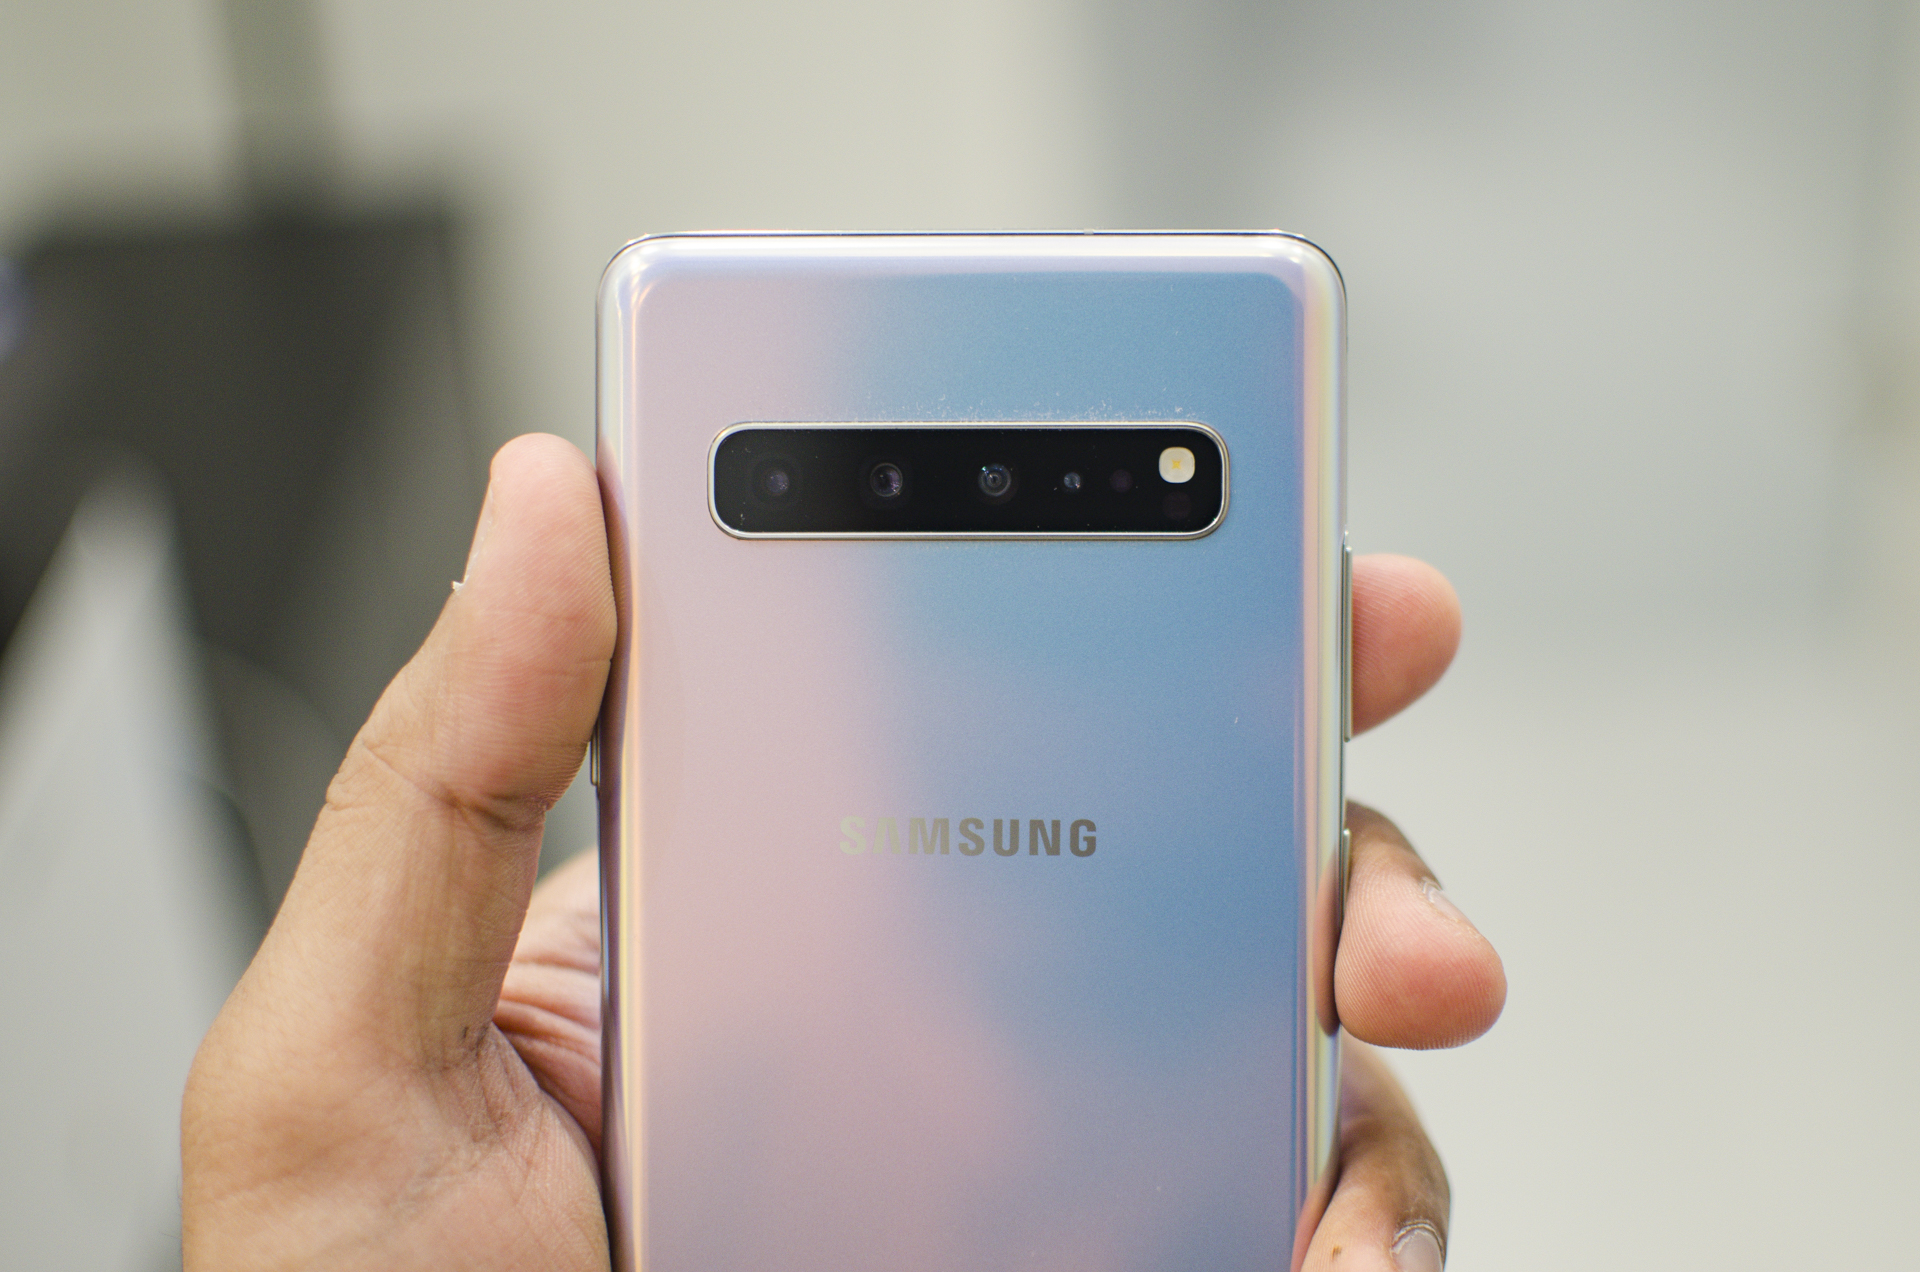 Samsung Galaxy S10 Review: Is this the finest Samsung phone?